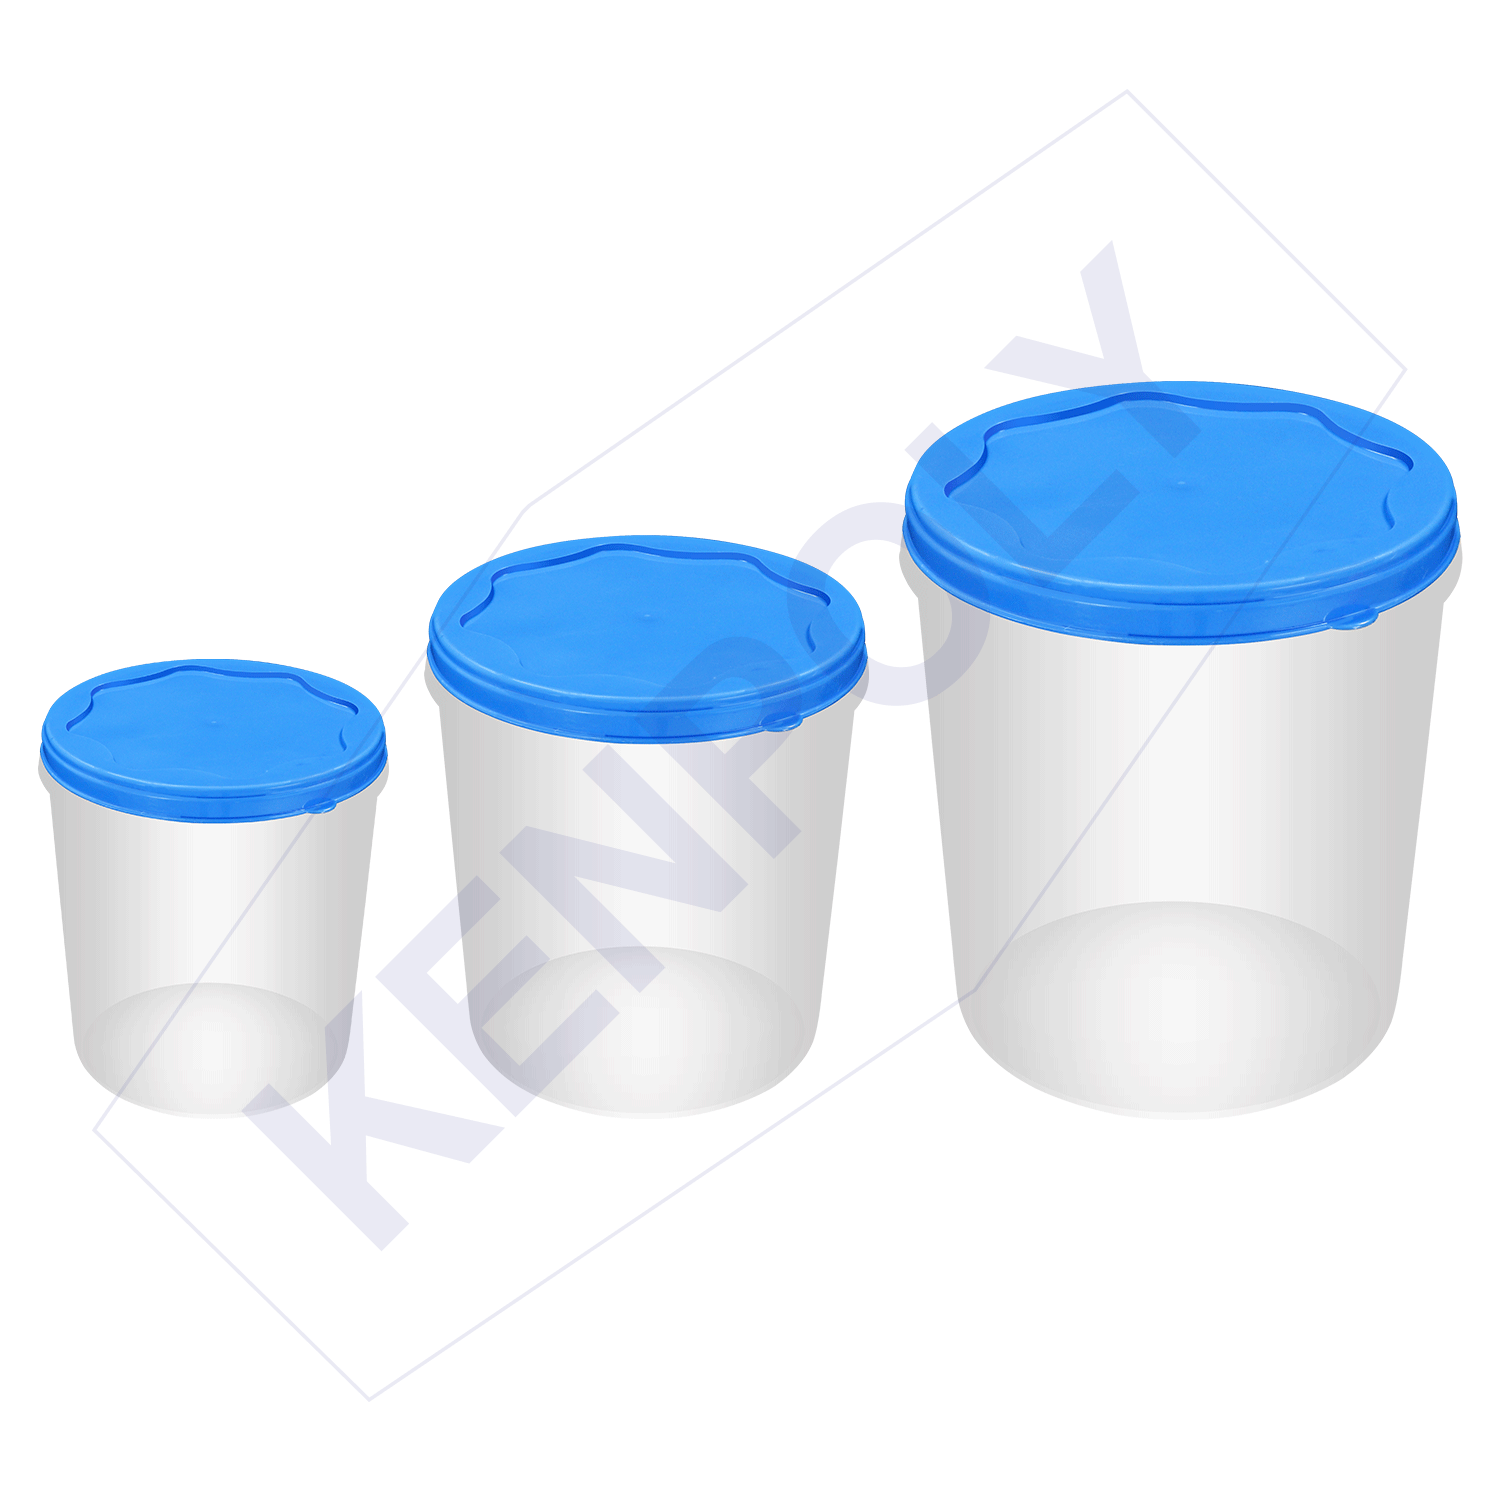 Tiny Tots Containers 200 ml  Kenpoly Manufacturers Limited